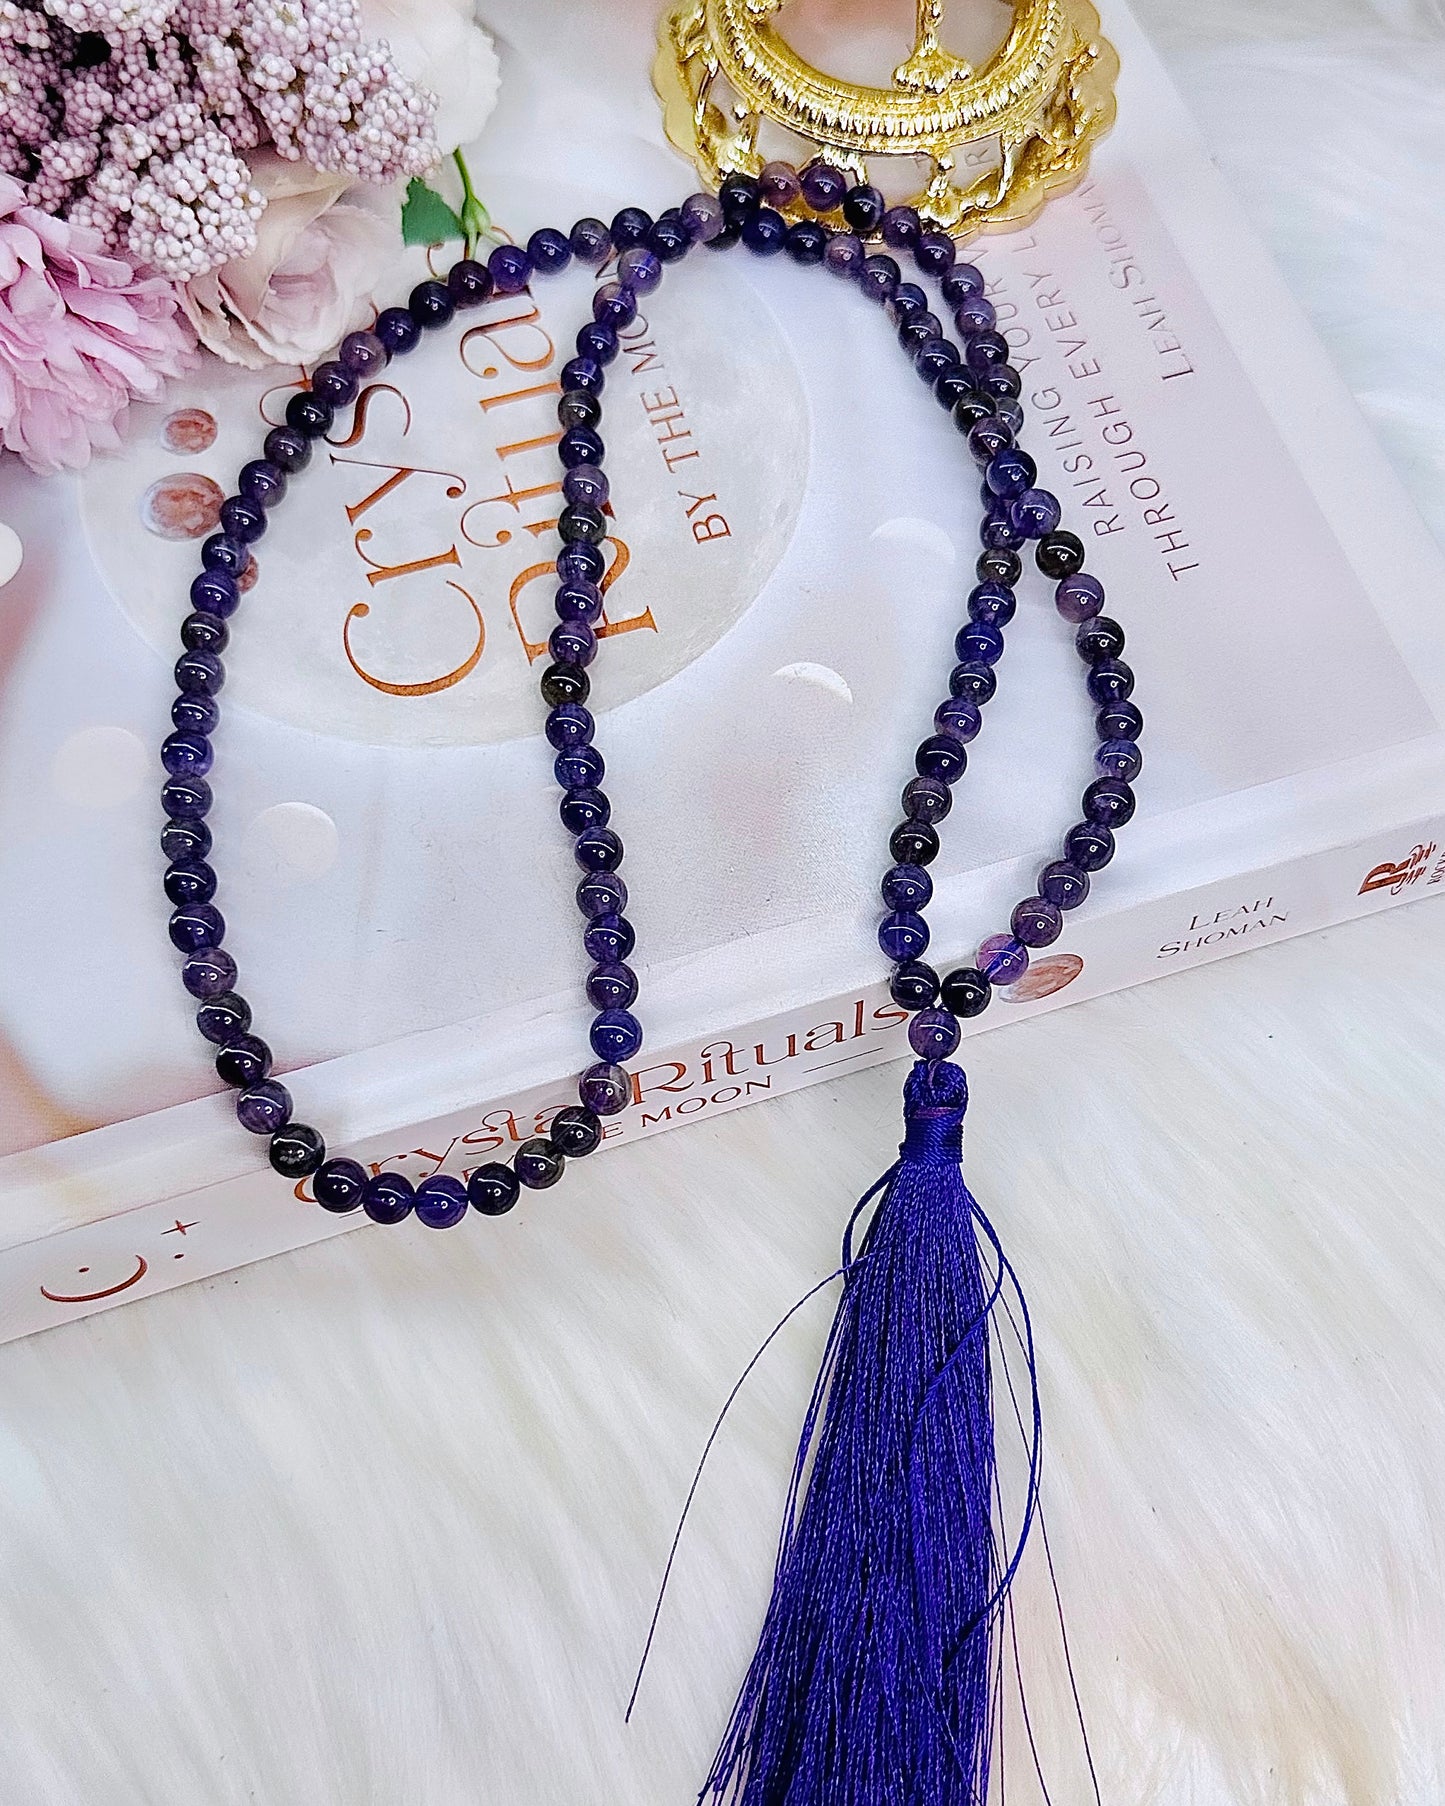 Connection To The Divine ~ Stunning Amethyst Mala Beads Perfect For Pray & Meditation